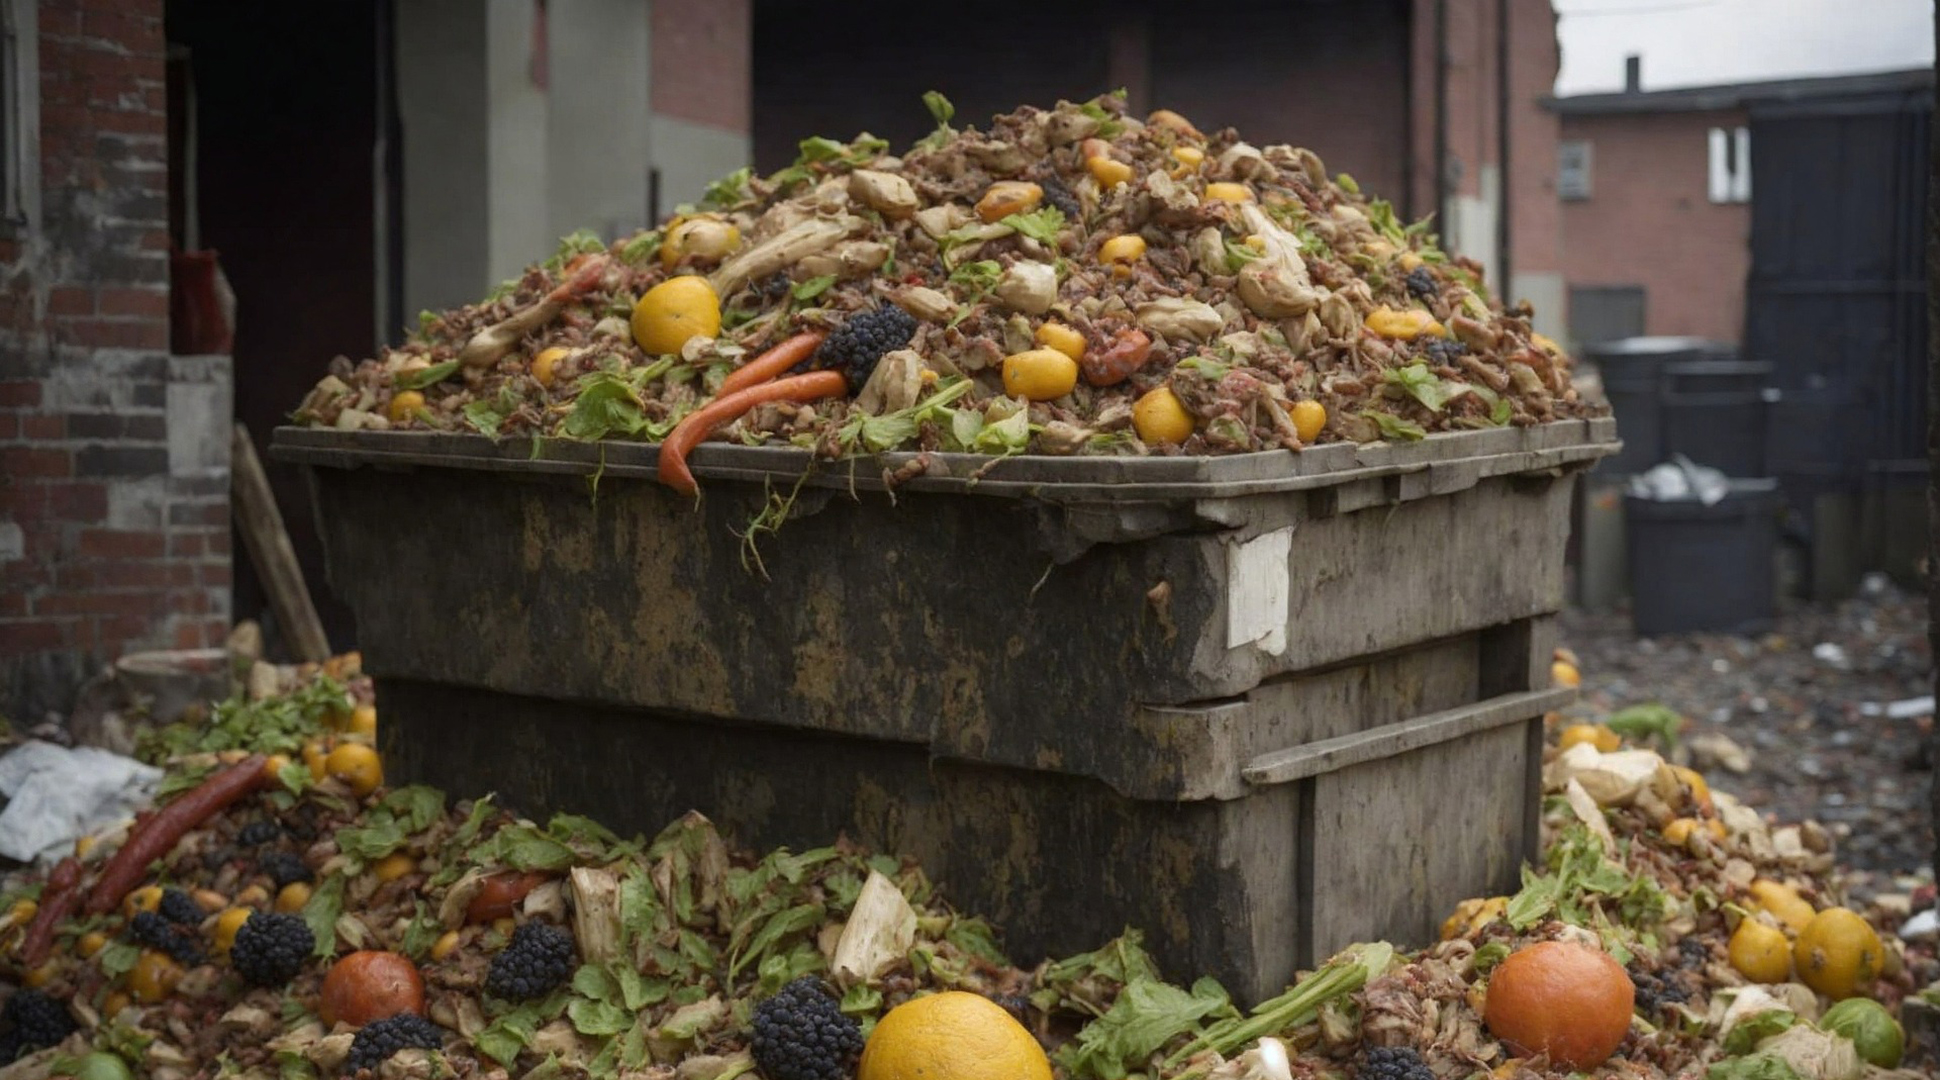 Getting a handle on food waste